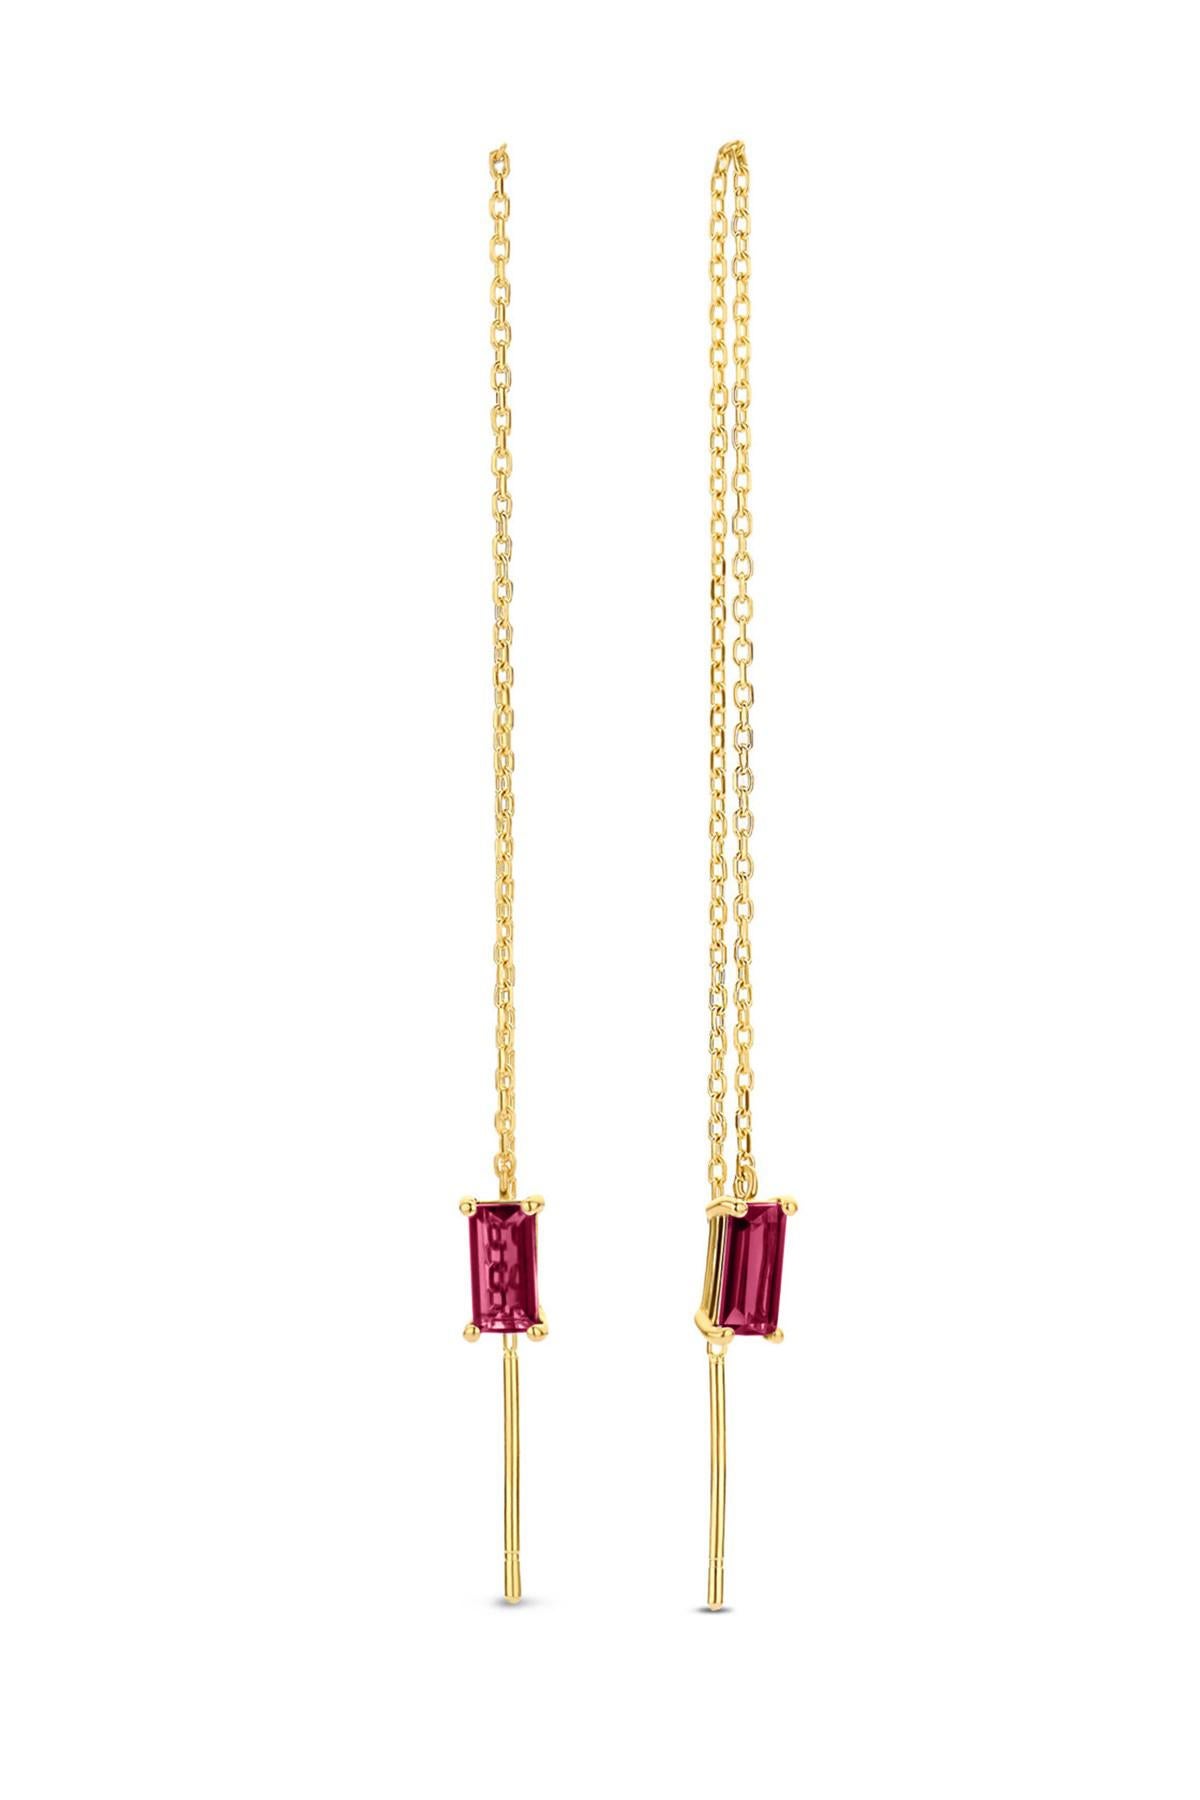 Modern Chain 14k Gold Earrings with Natural Rubies For Sale